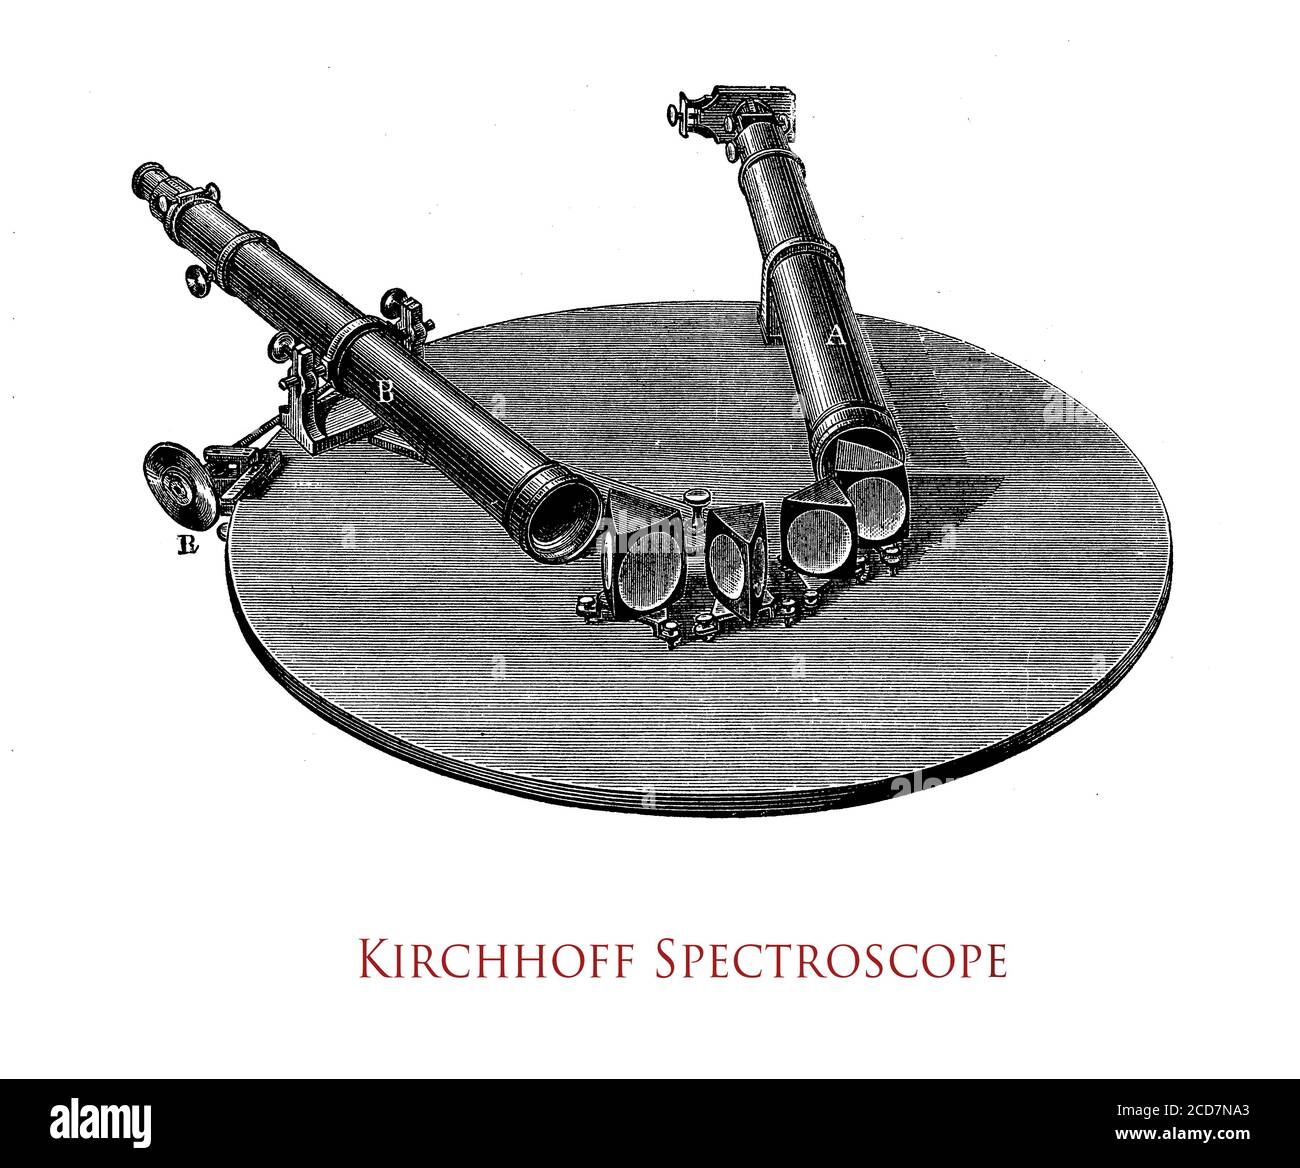 Kirchhoff optical spectrometer or spectroscope, instrument  to measure properties of light over a specific portion of the electromagnetic spectrum in spectroscopic analysis to identify materials Stock Photo